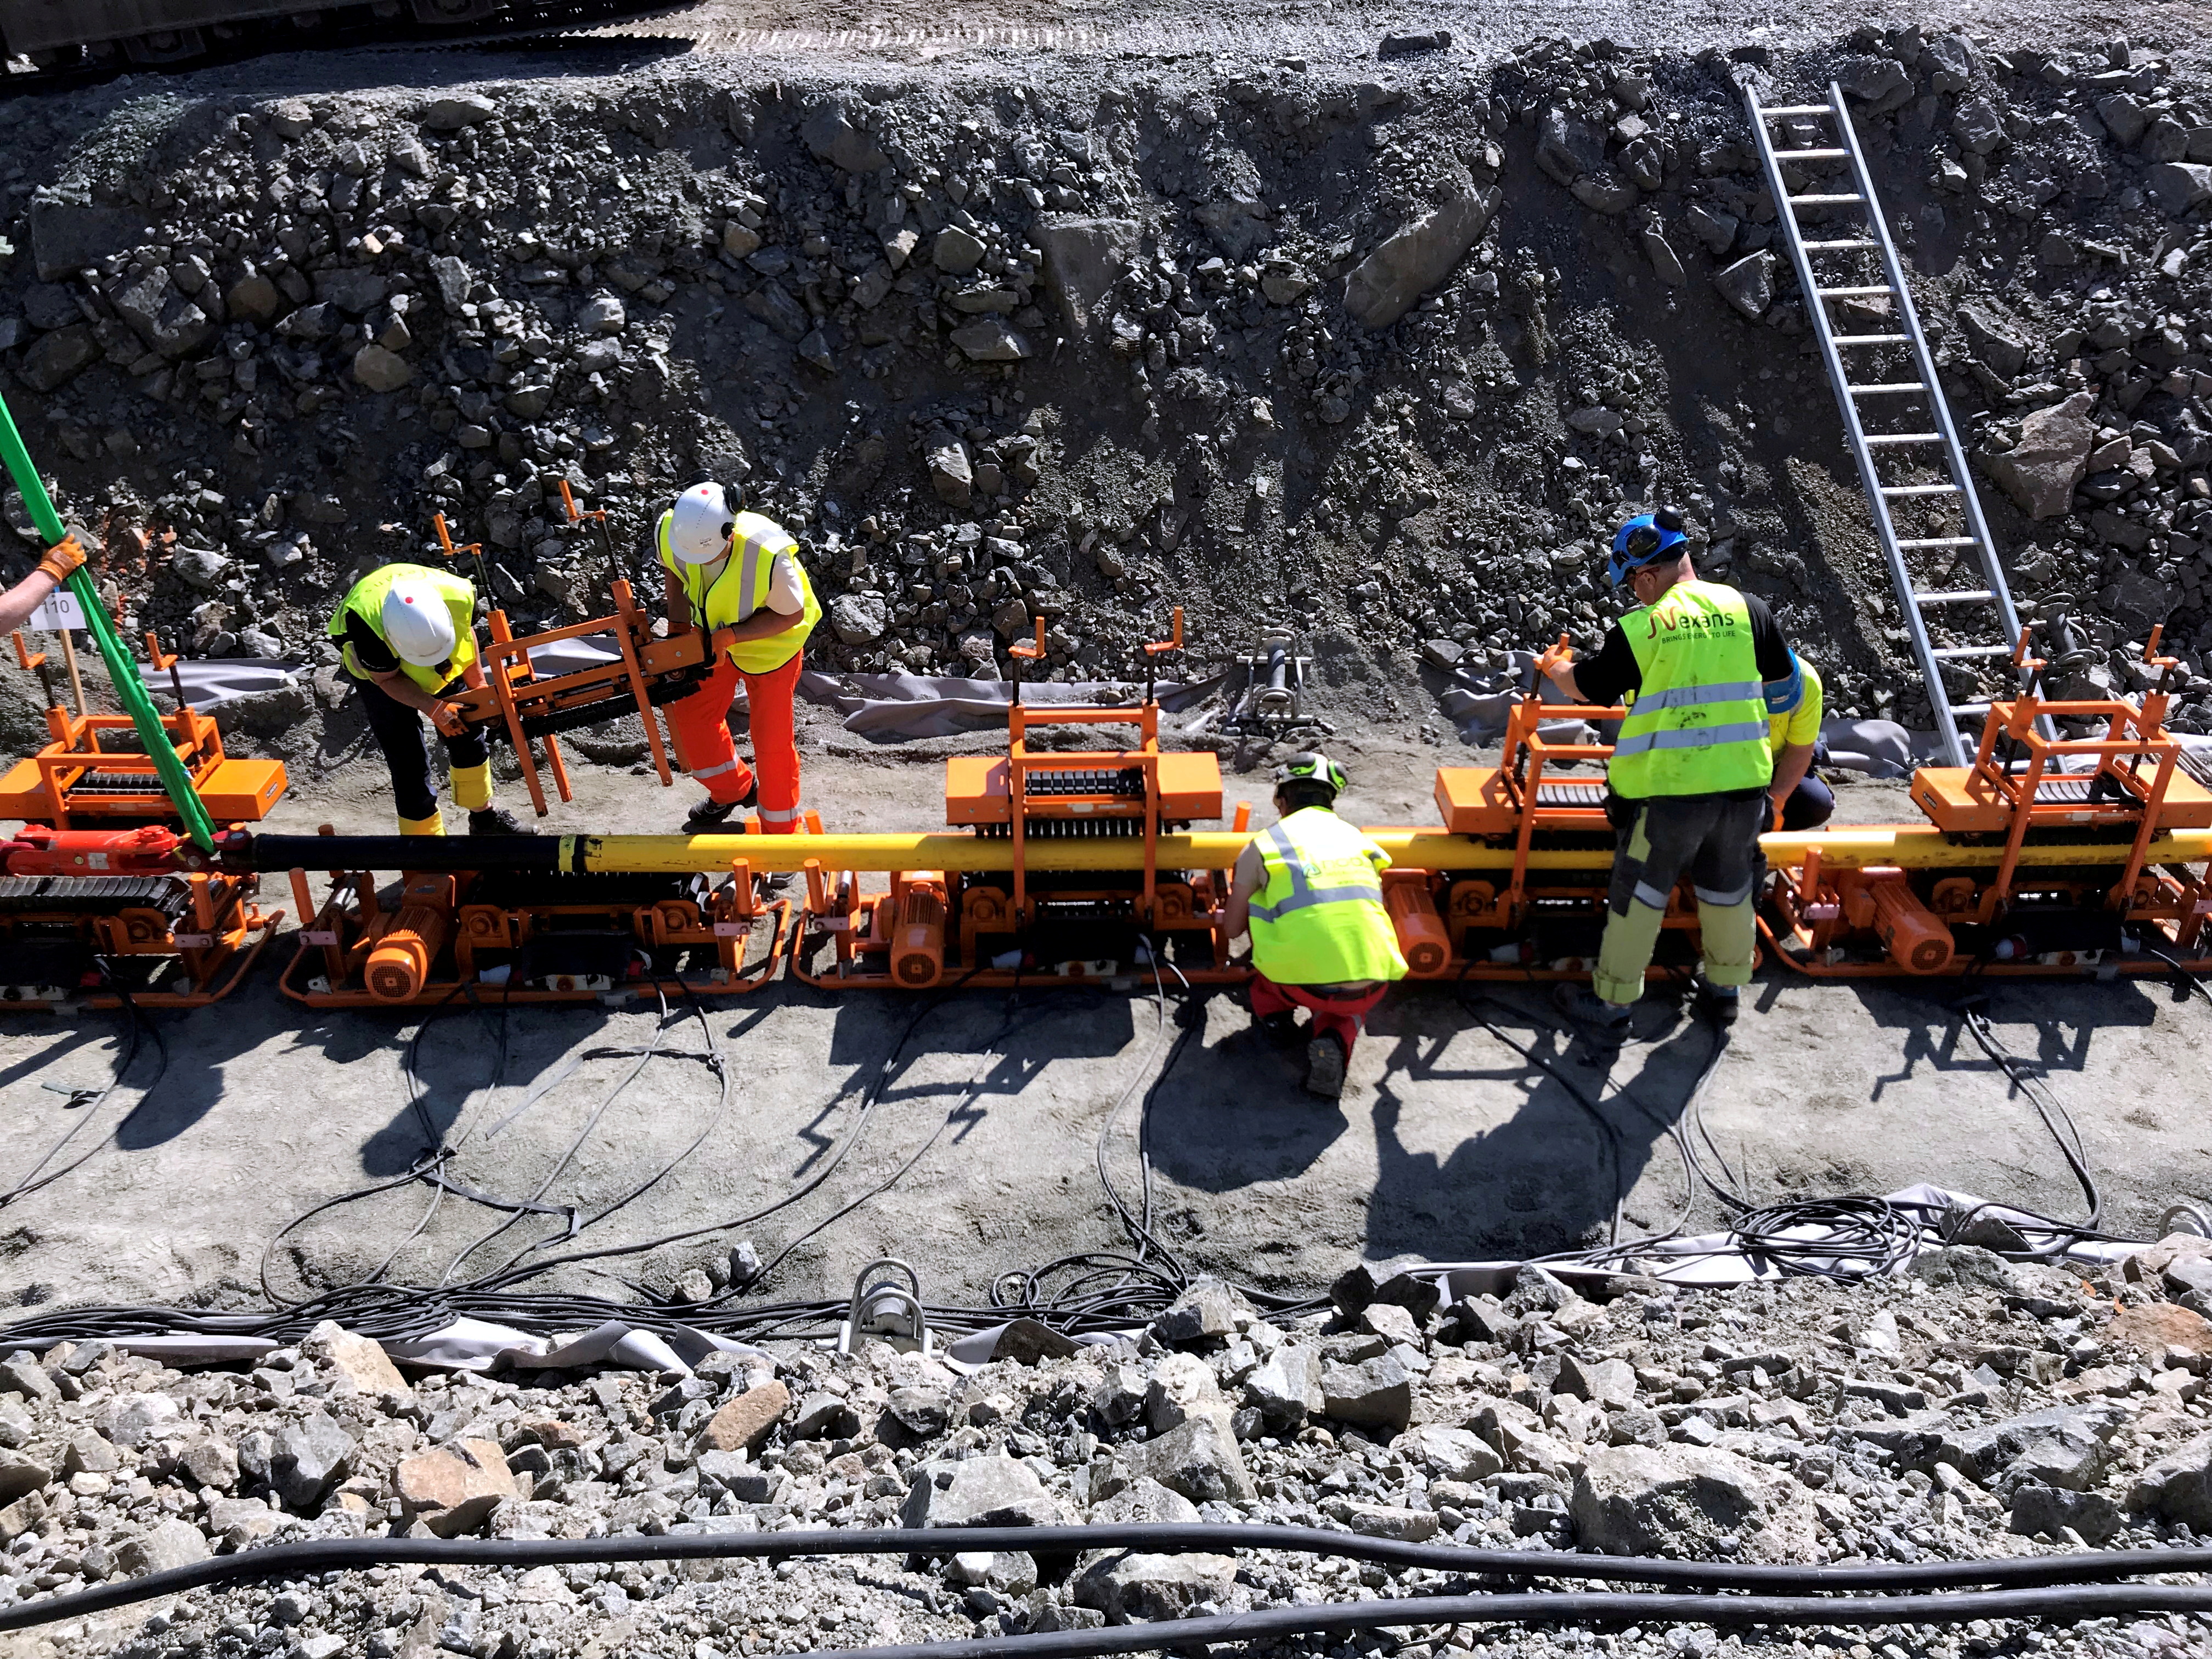 Workers lay a NordLink subsea interconnector power cable to connect Norway and Germany at the Vollesfjord fjord near Flekkefjord